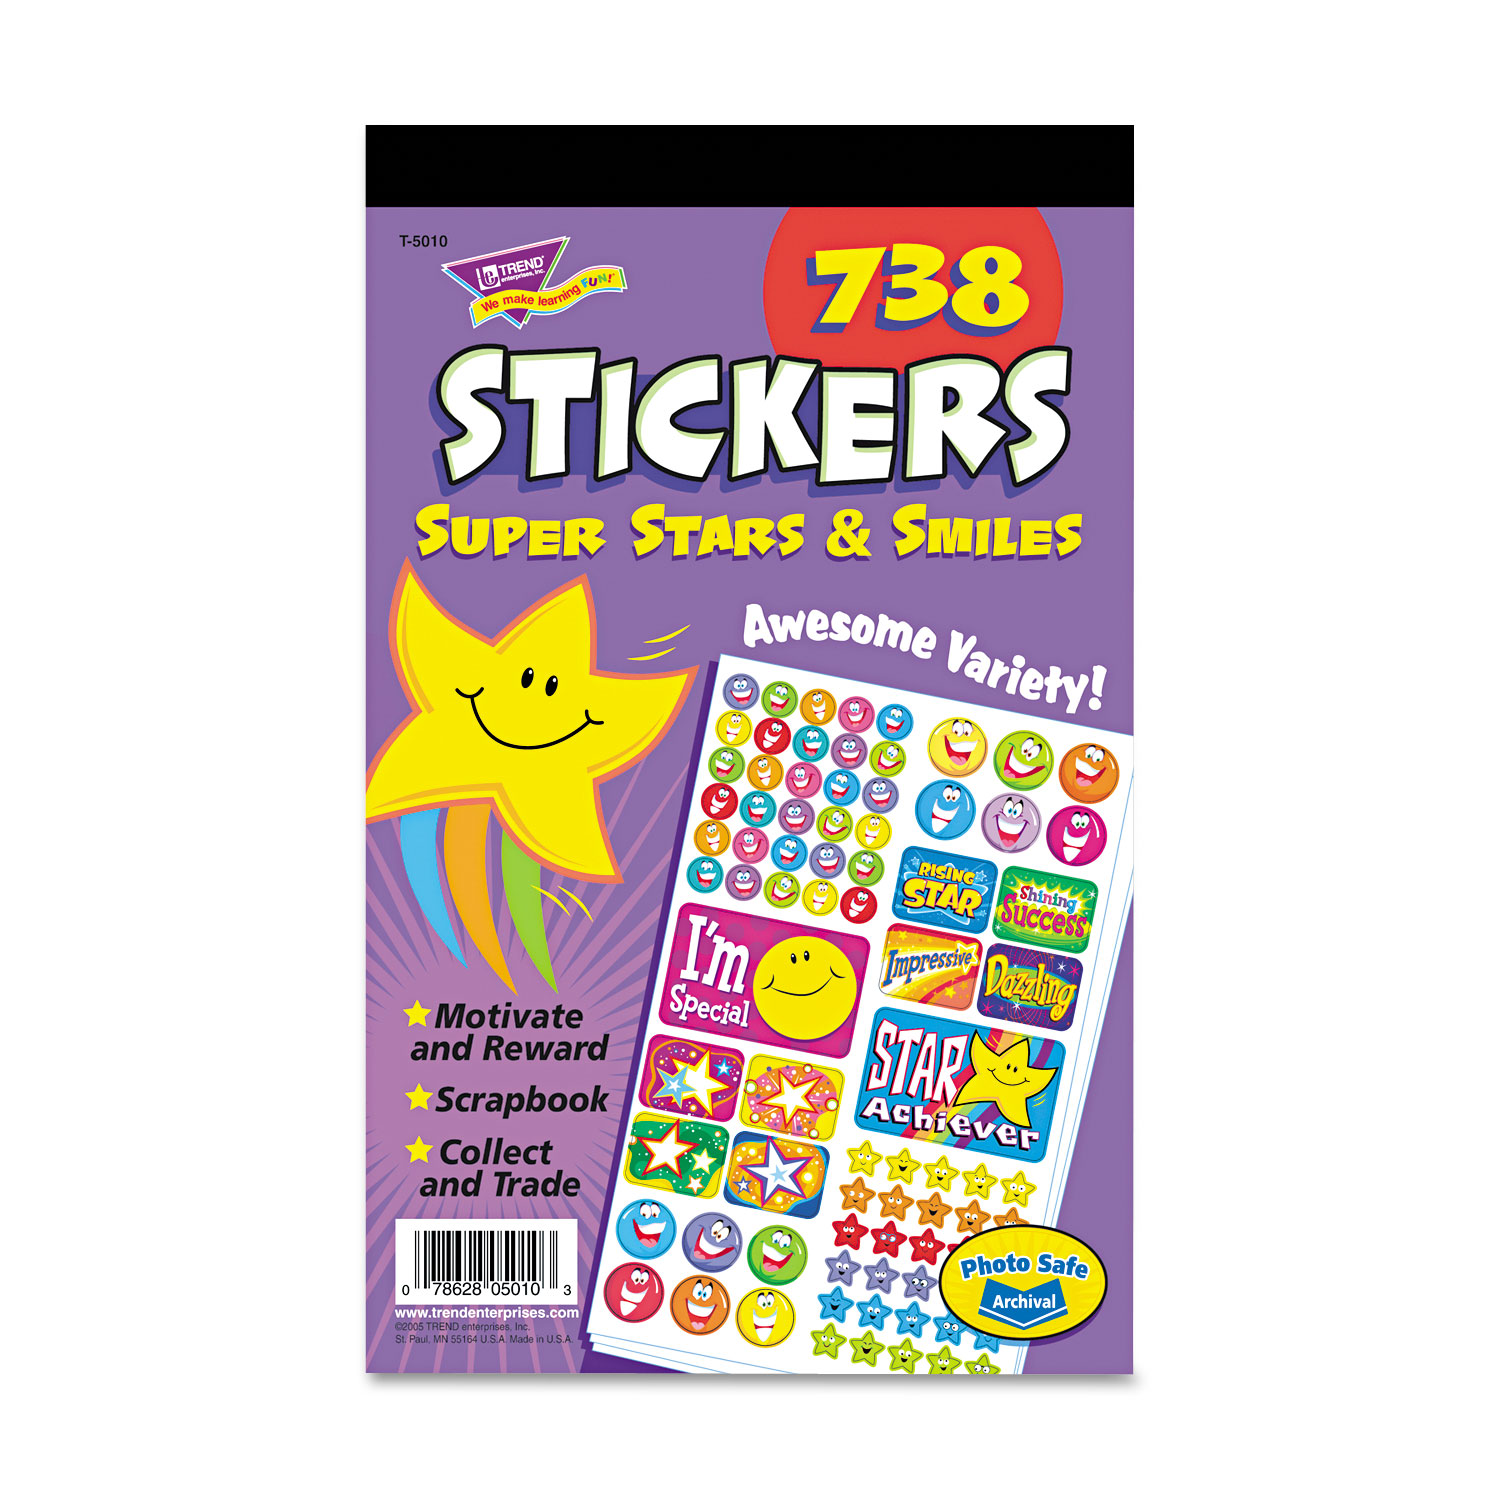 TEPT5010 TREND Sticker Assortment Pack, Super Stars and Smiles, 738 Stickers/Pad